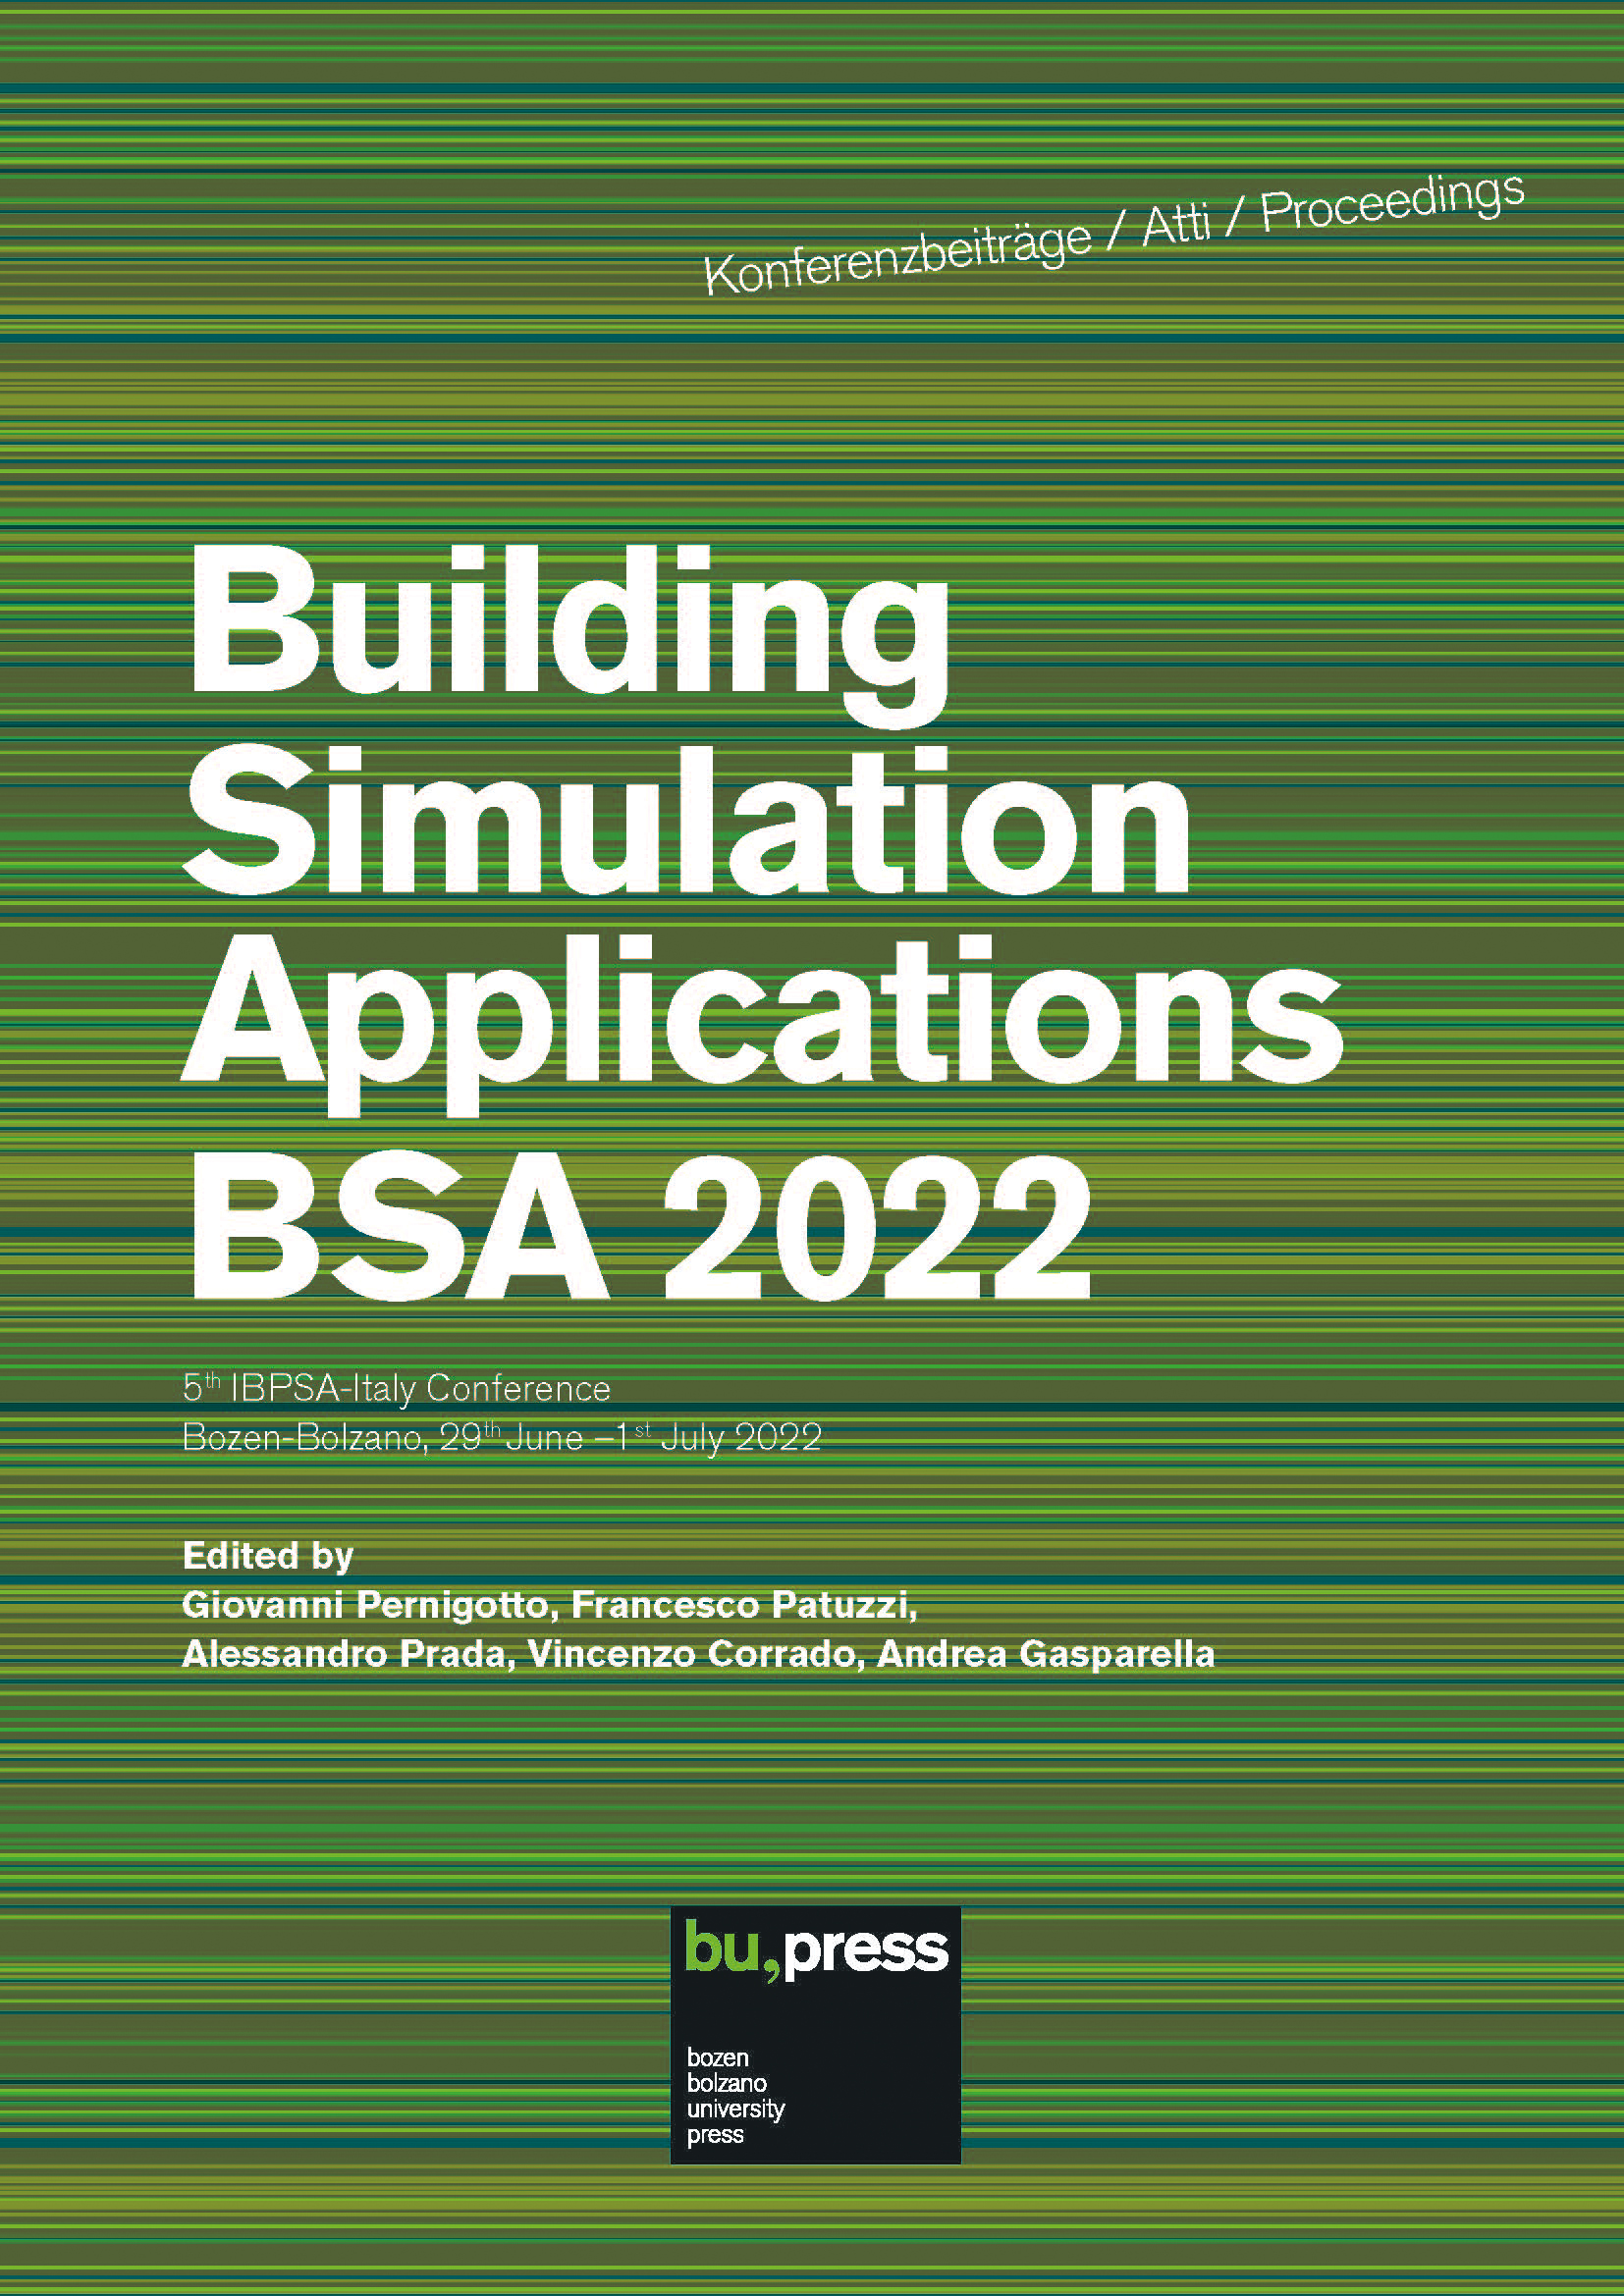 Conference proceedings - BSA 2022